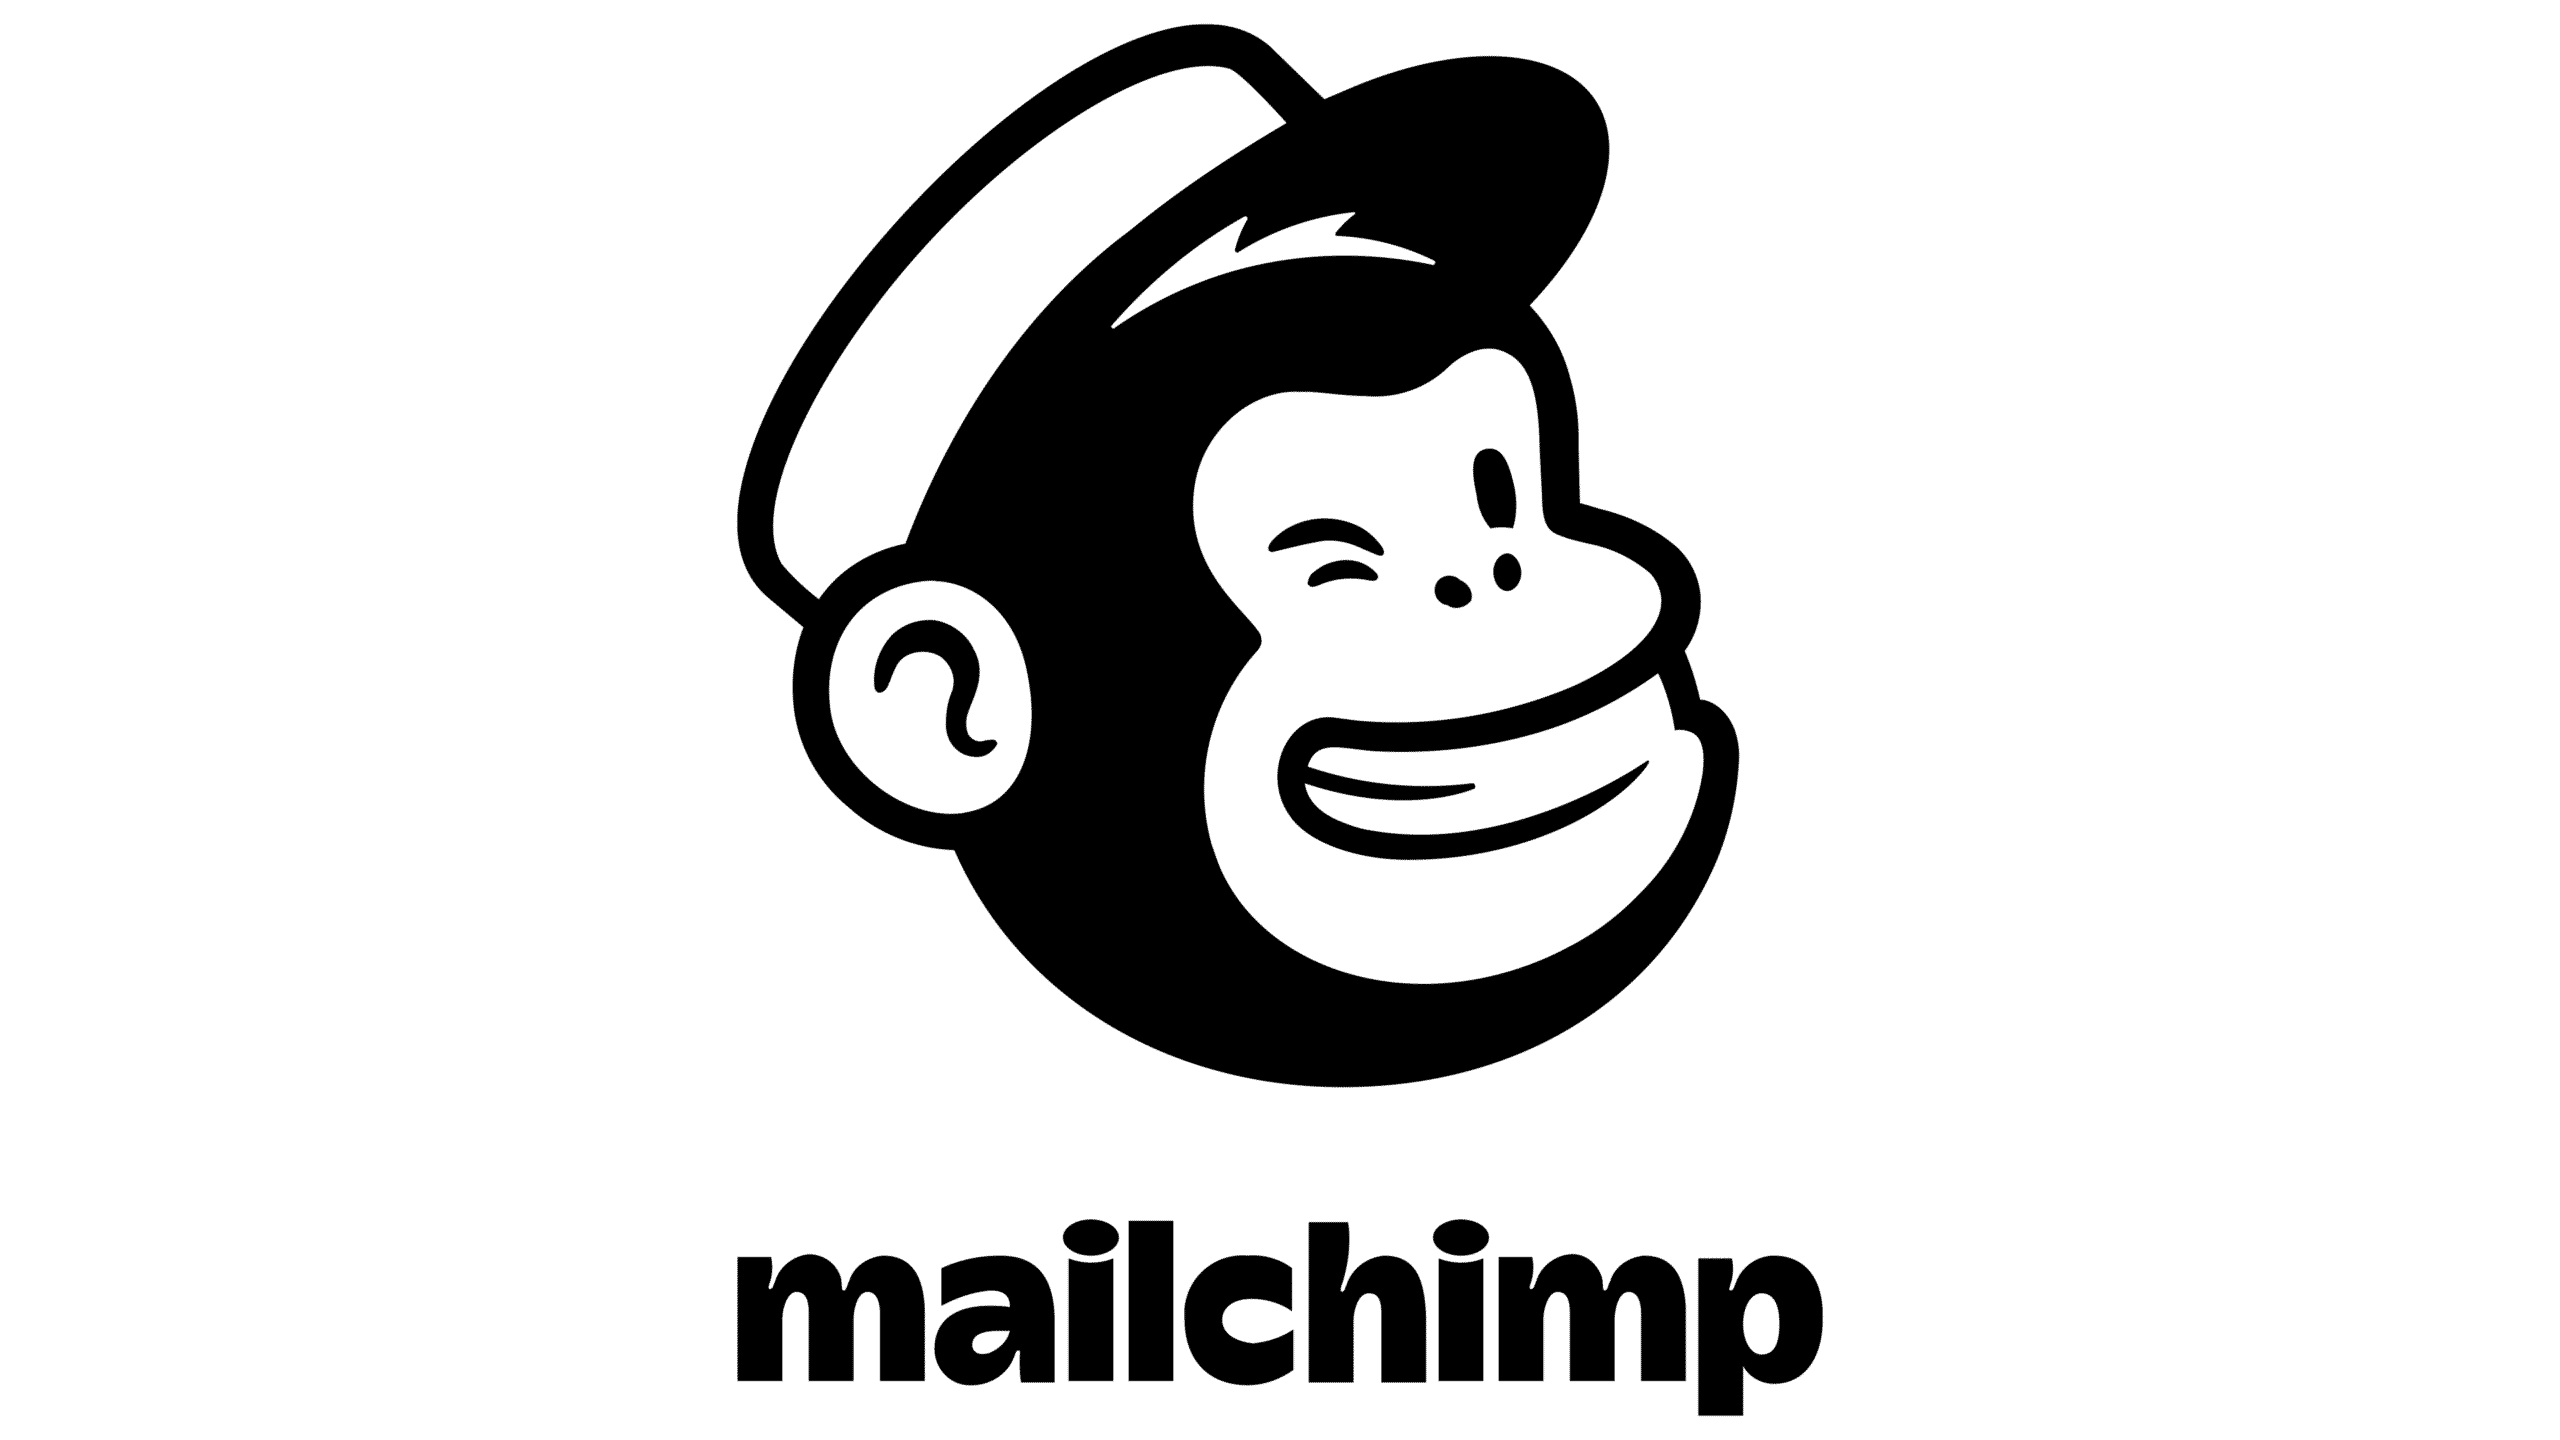 the threat actor breached mailchimp customer accounts